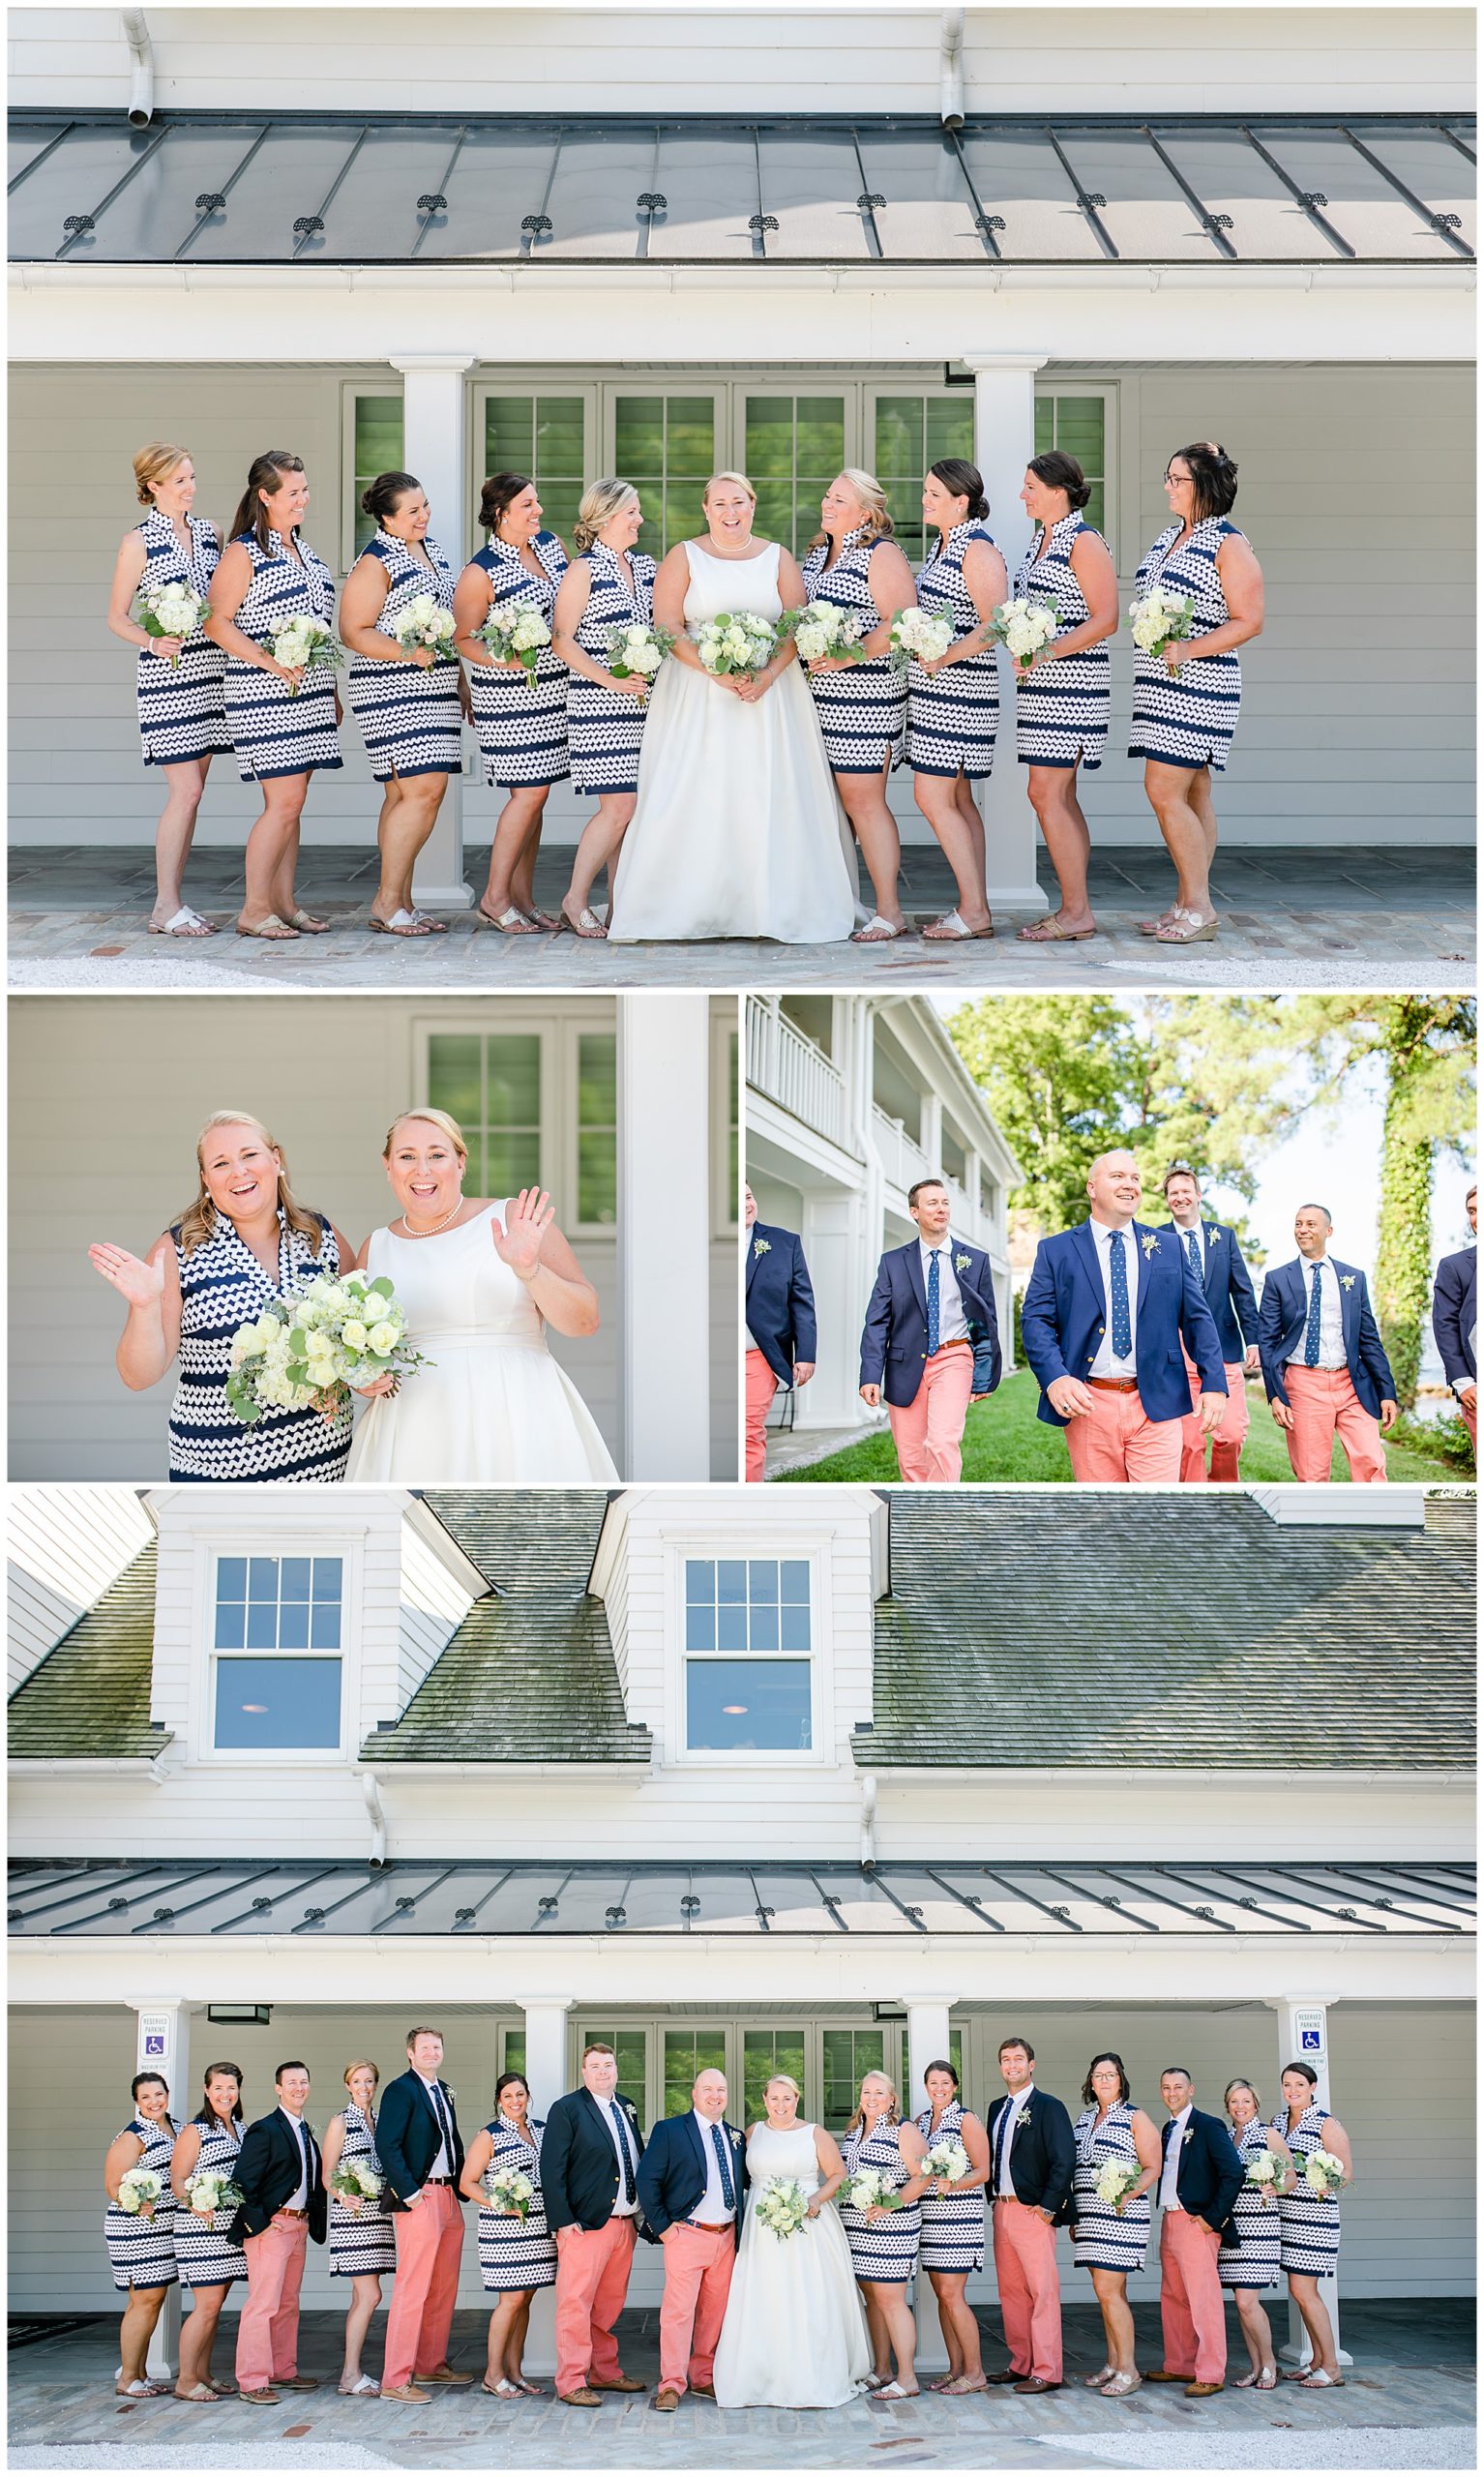 Nantucket inspired Gibson Island Club wedding, nautical wedding inspiration, Annapolitan wedding inspiration, Gibson Island Club wedding photography, Gibson Island Club wedding photographer, Annapolis wedding photographer, Baltimore wedding photographer, Maryland wedding photographer, nautical aesthetic, Annapolis wedding inspiration, Rachel E.H. Photography, bride with bridesmaids, bride with maid of honor, groom with groomsmen, bride and groom with wedding party, bridesmaids in Sail to Sable dresses